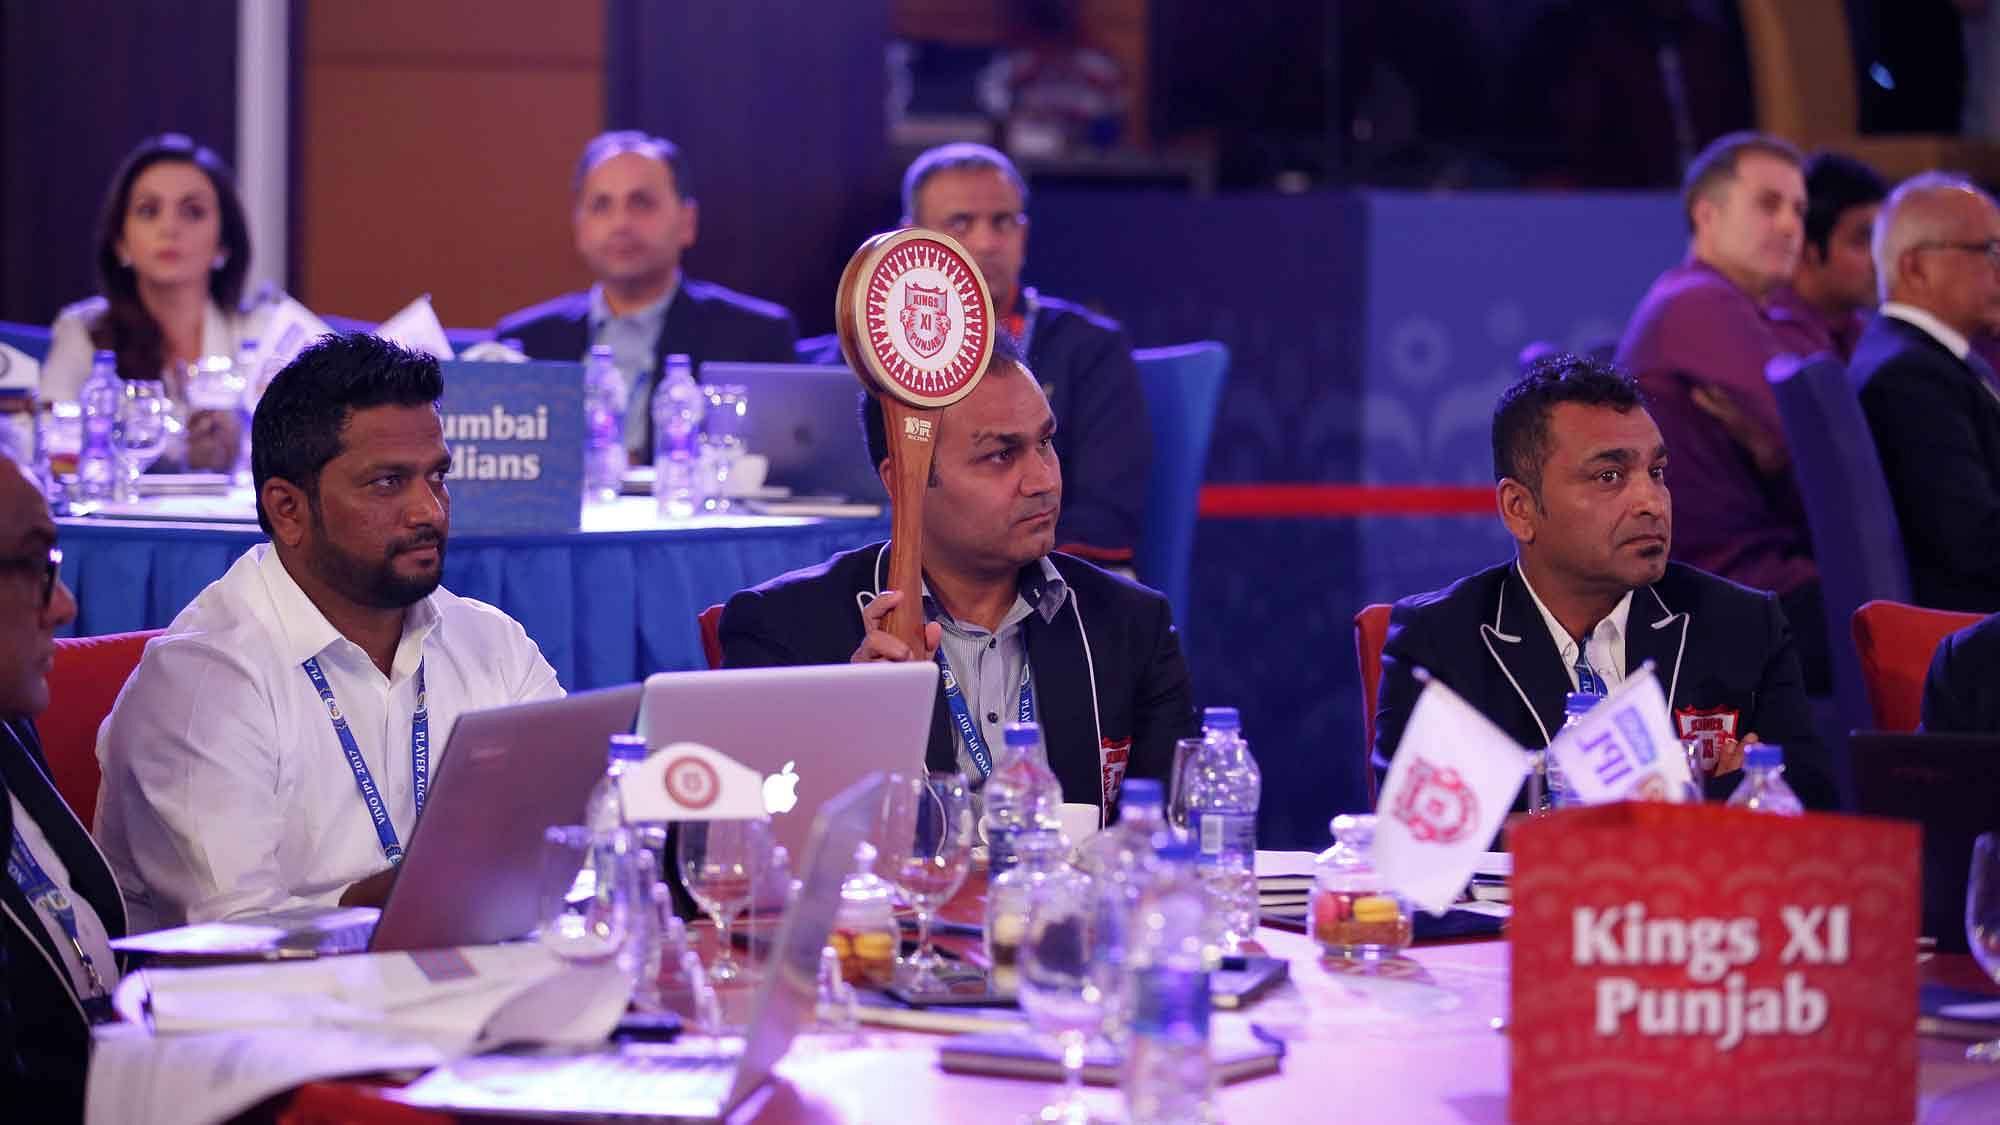 Virender Sehwag Kings XI Punjab head cricket operations during the Vivo IPL 2017 Player Auction held at the Carlton-Ritz hotel in Bangalore on the 20th February 2017. (Photo: BCCI)